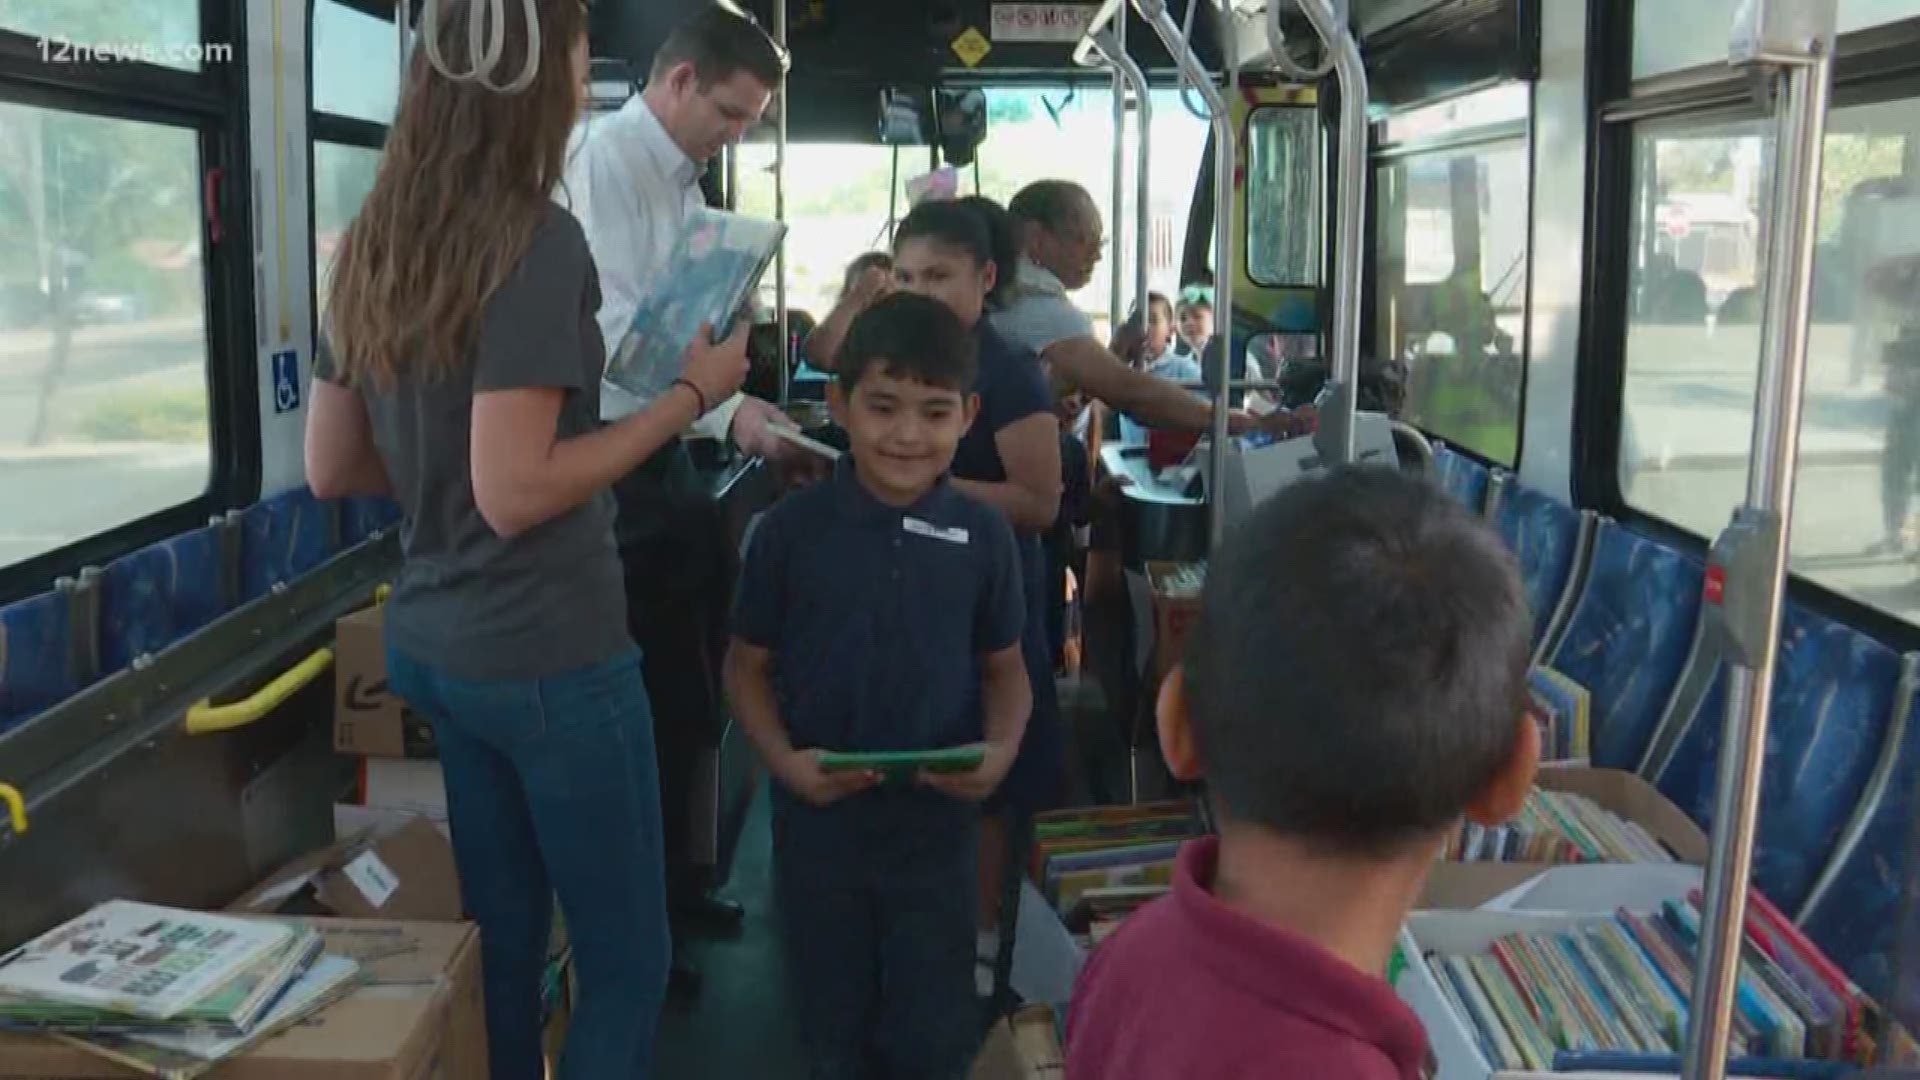 This bus driver has turned a city bus into a summer reading program.